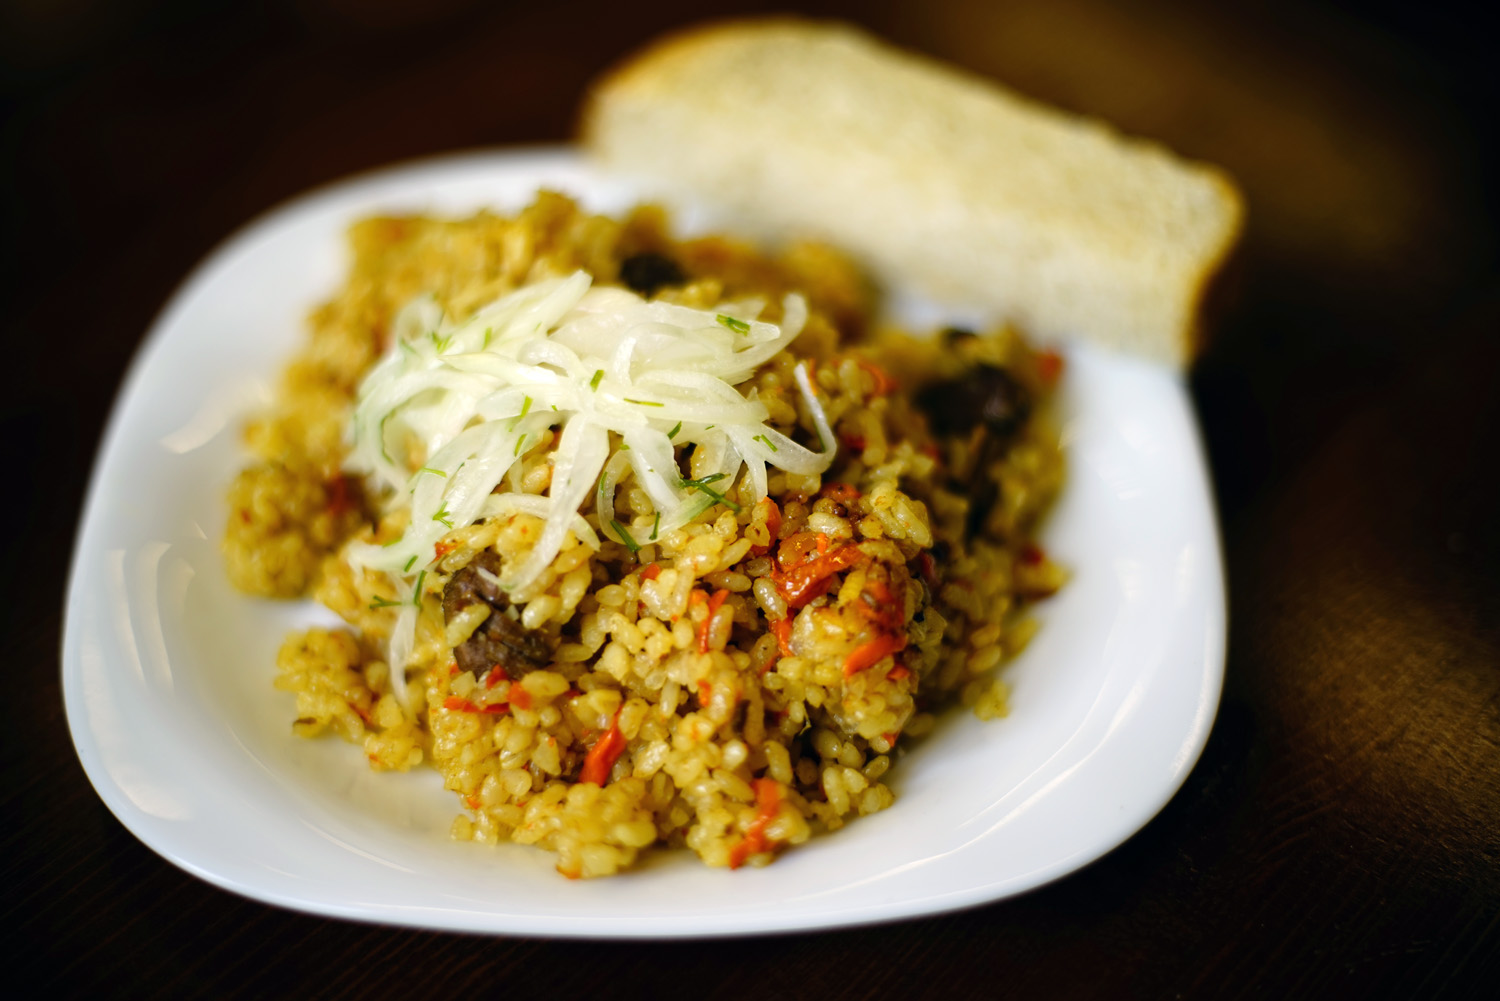 Ain't nothing better then a plate of juicy Plov when hungry 